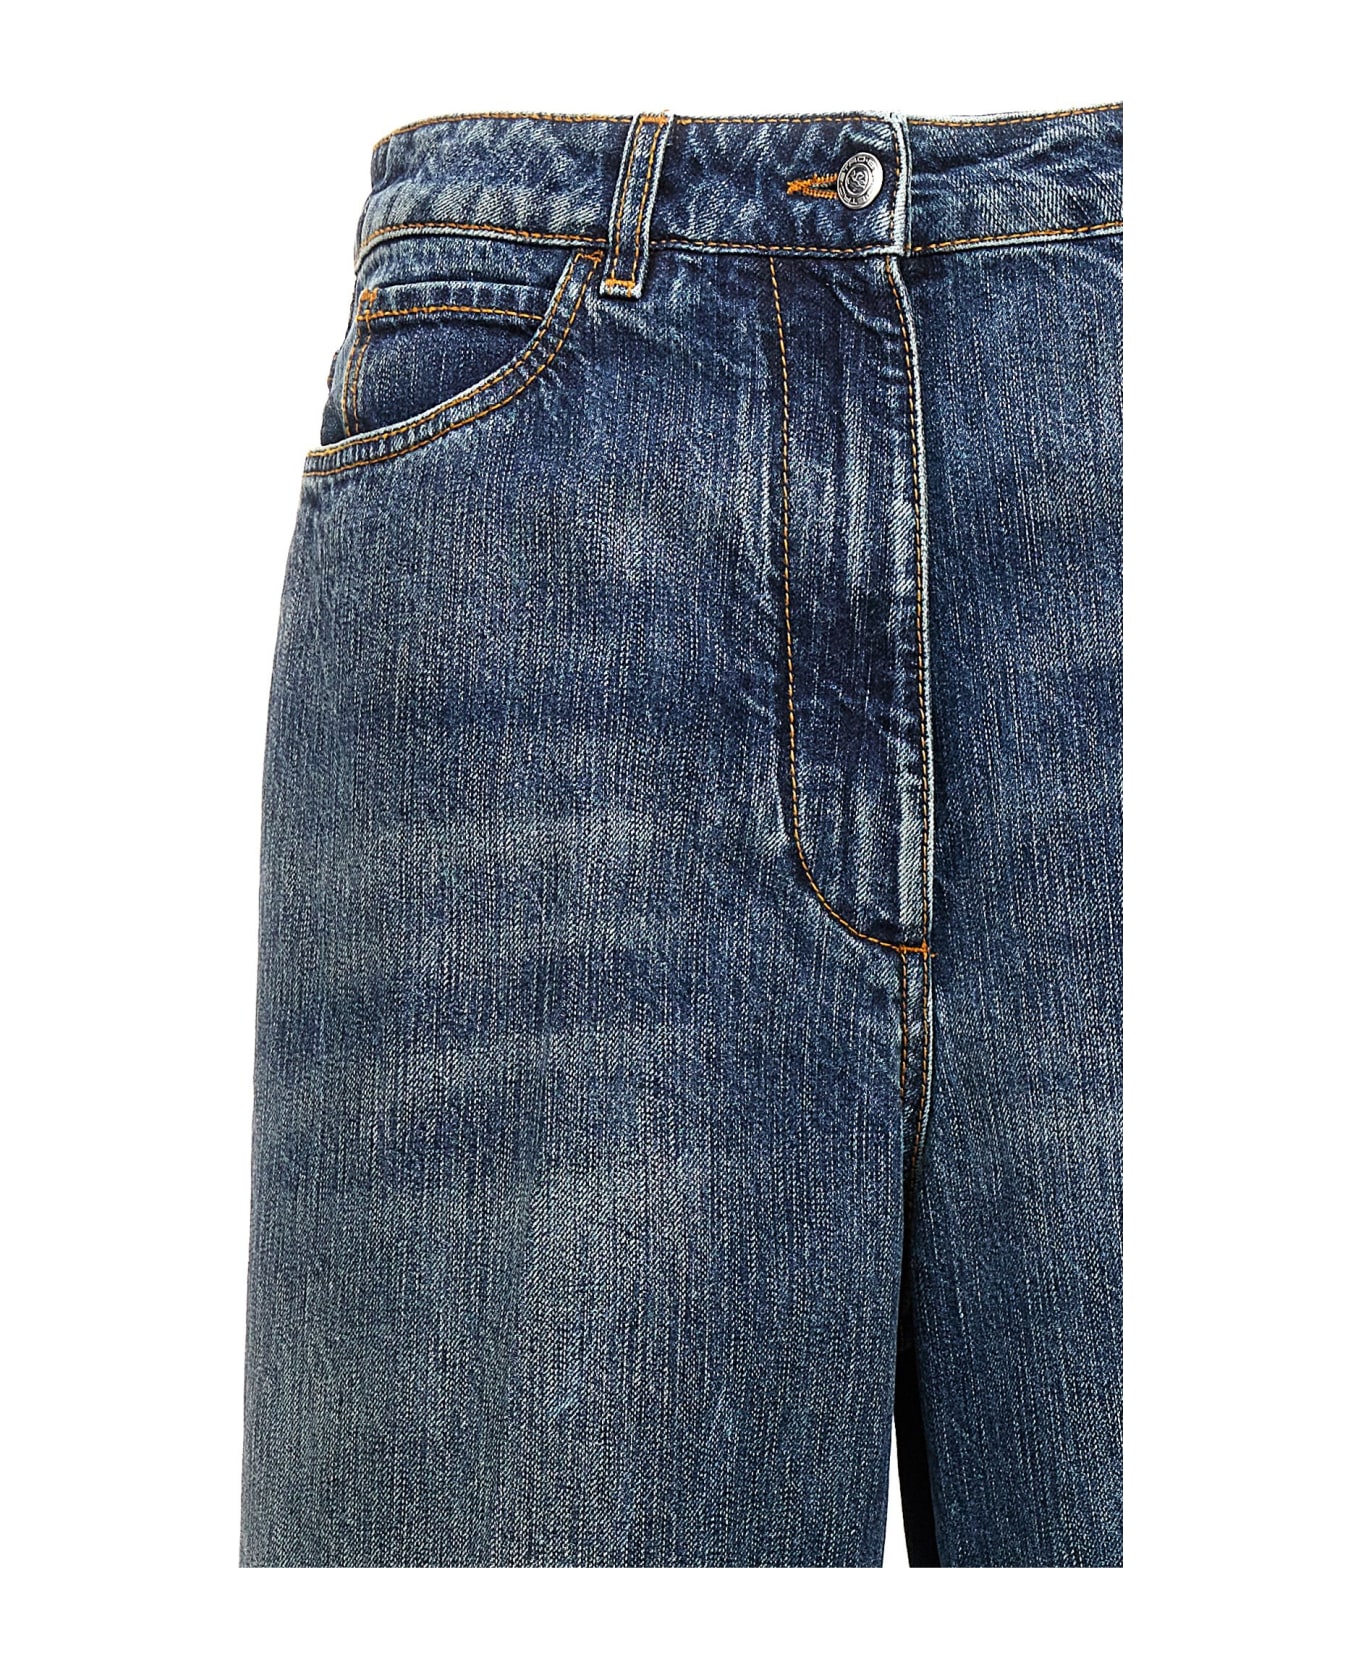 Etro Logo Embroidery Jeans - Blue